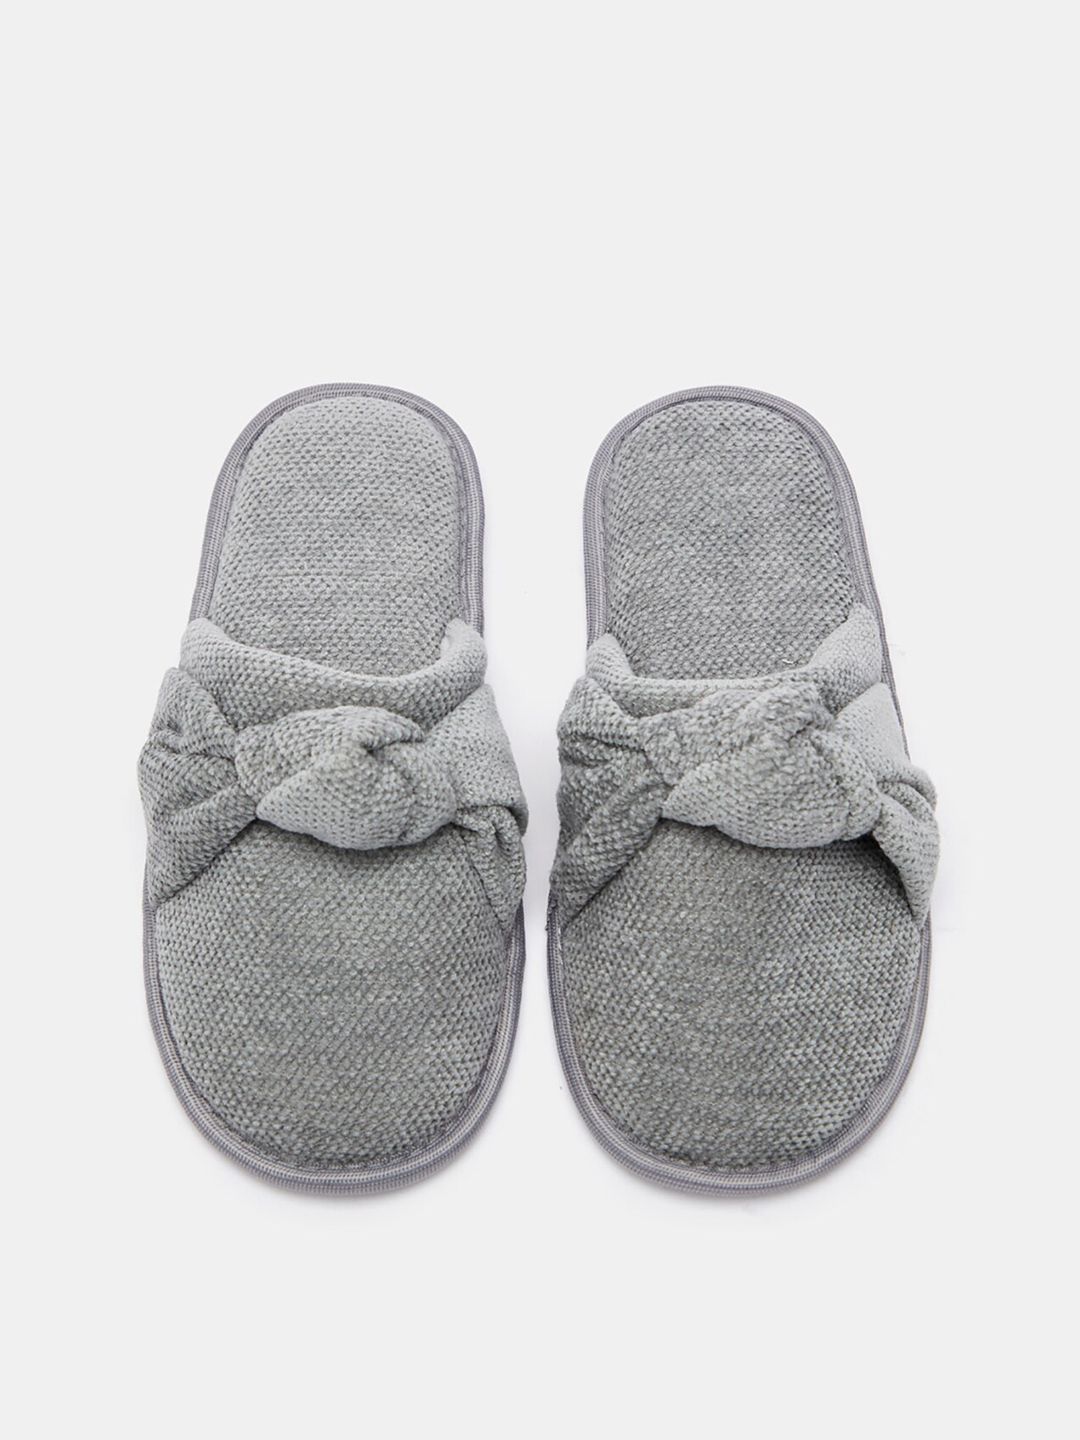 shoexpress Women Grey Room Slippers Price in India